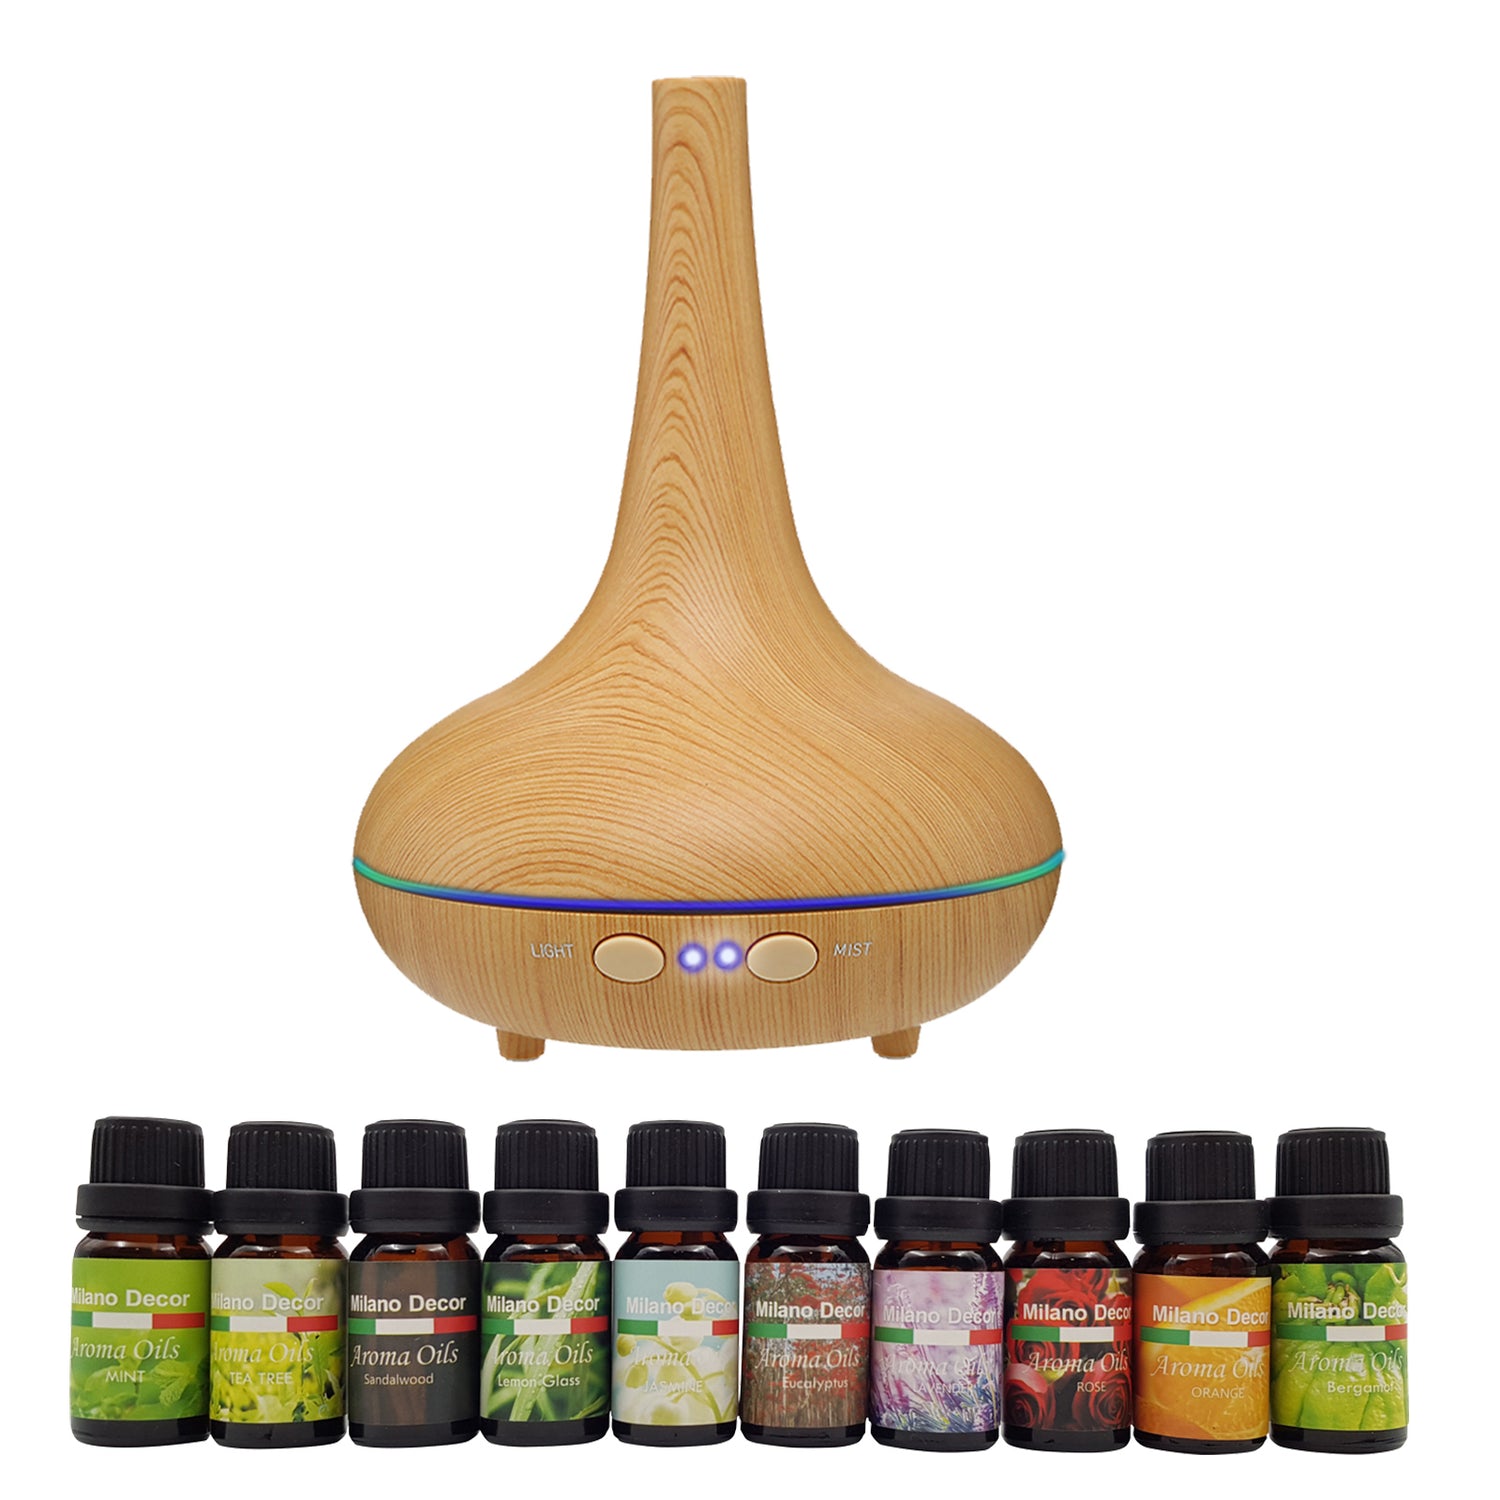 Milano Aroma Diffuser Set With 10 Pack Diffuser Oils Humidifier Aromatherapy-Home Fragrances-PEROZ Accessories